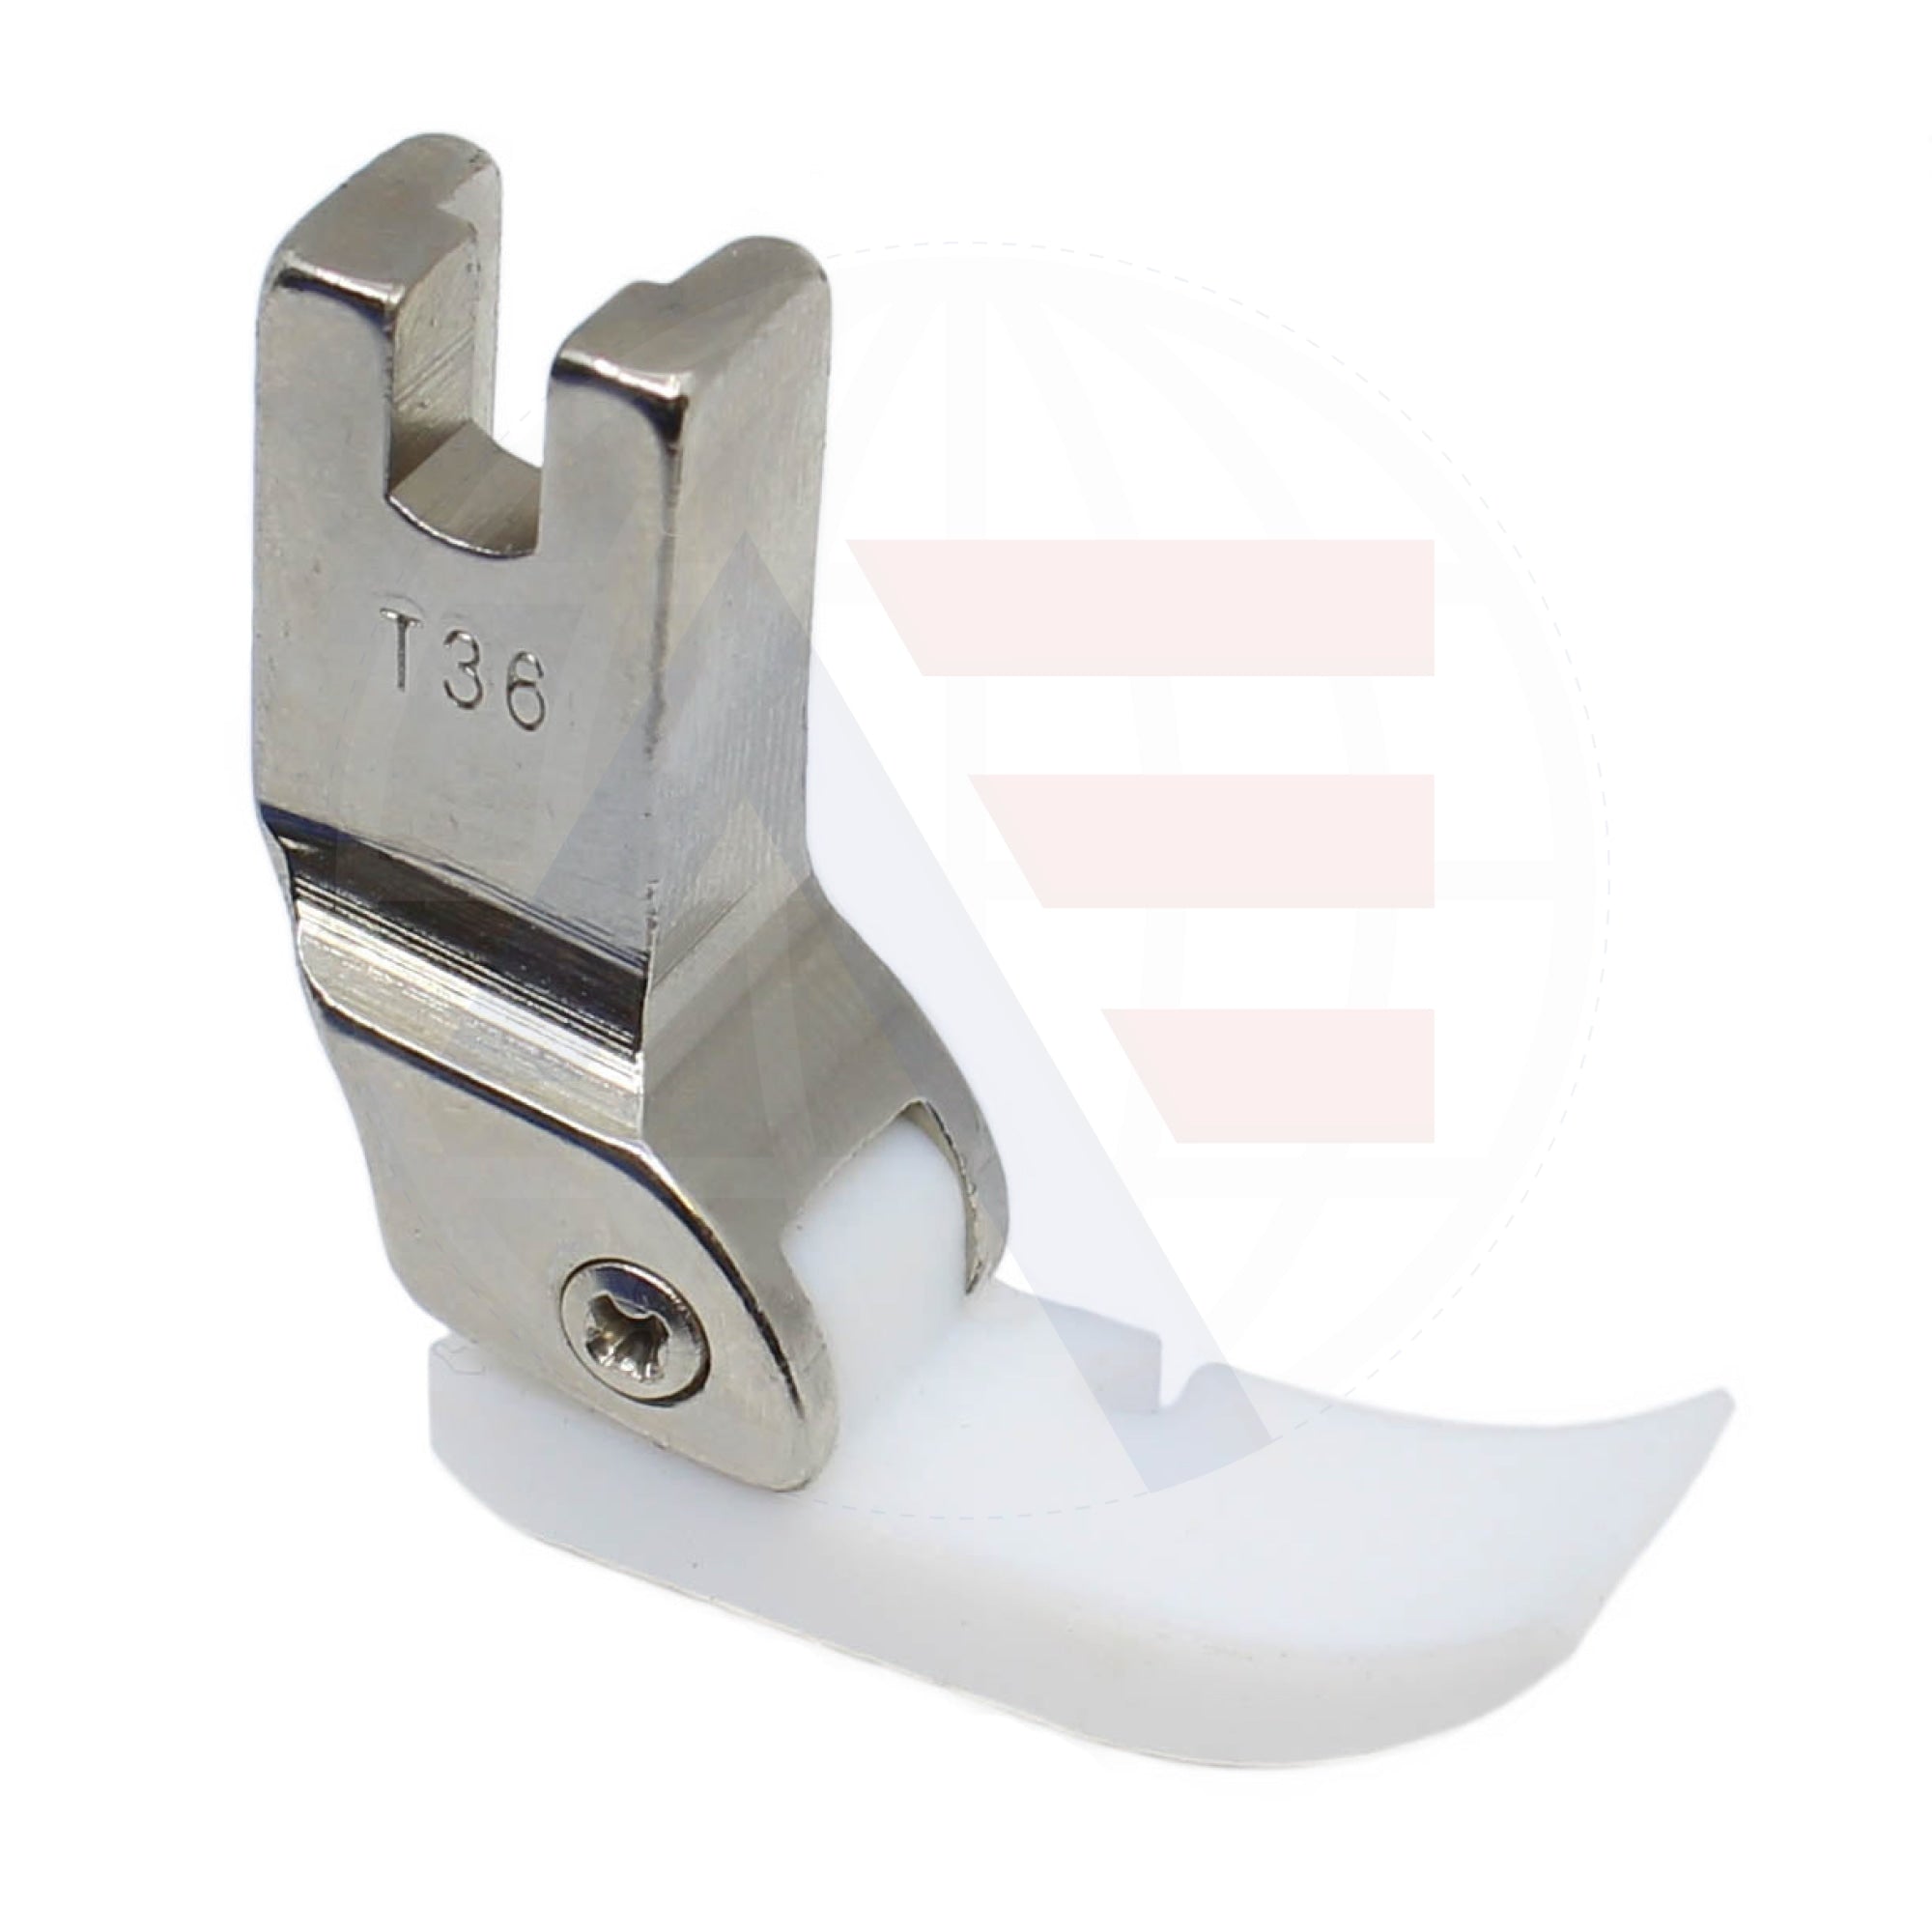 T36 Teflon Foot Sewing Machine Spare Parts